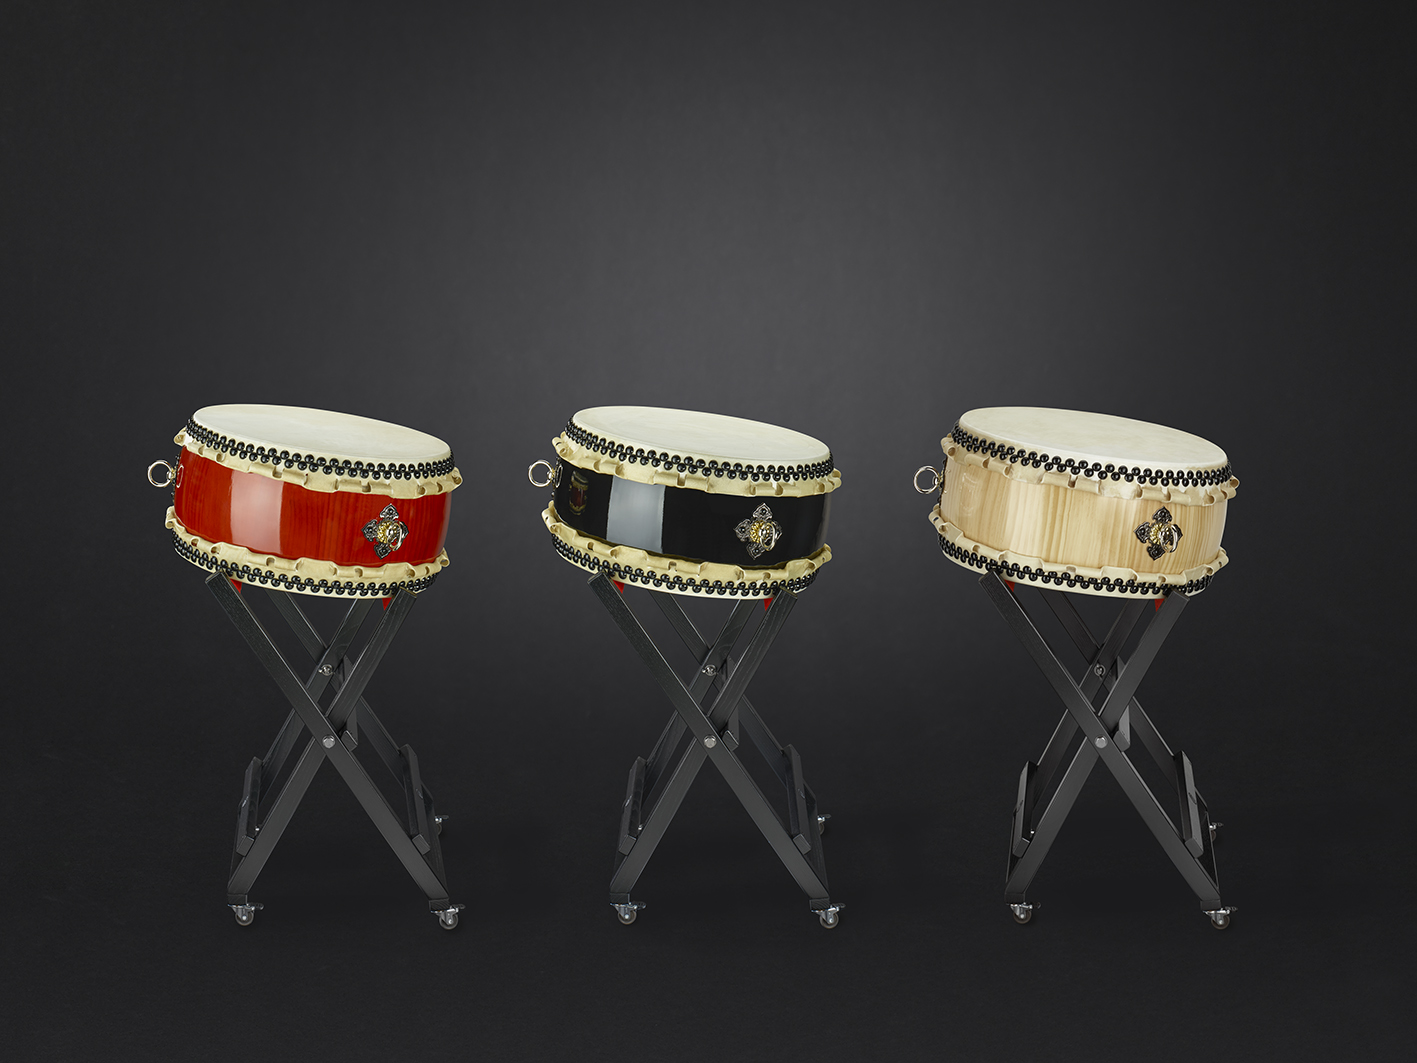 Hira-Daiko hq. drums (Ø48cm/h:25cm) with X-stand and wheels   (695€ / 195€)